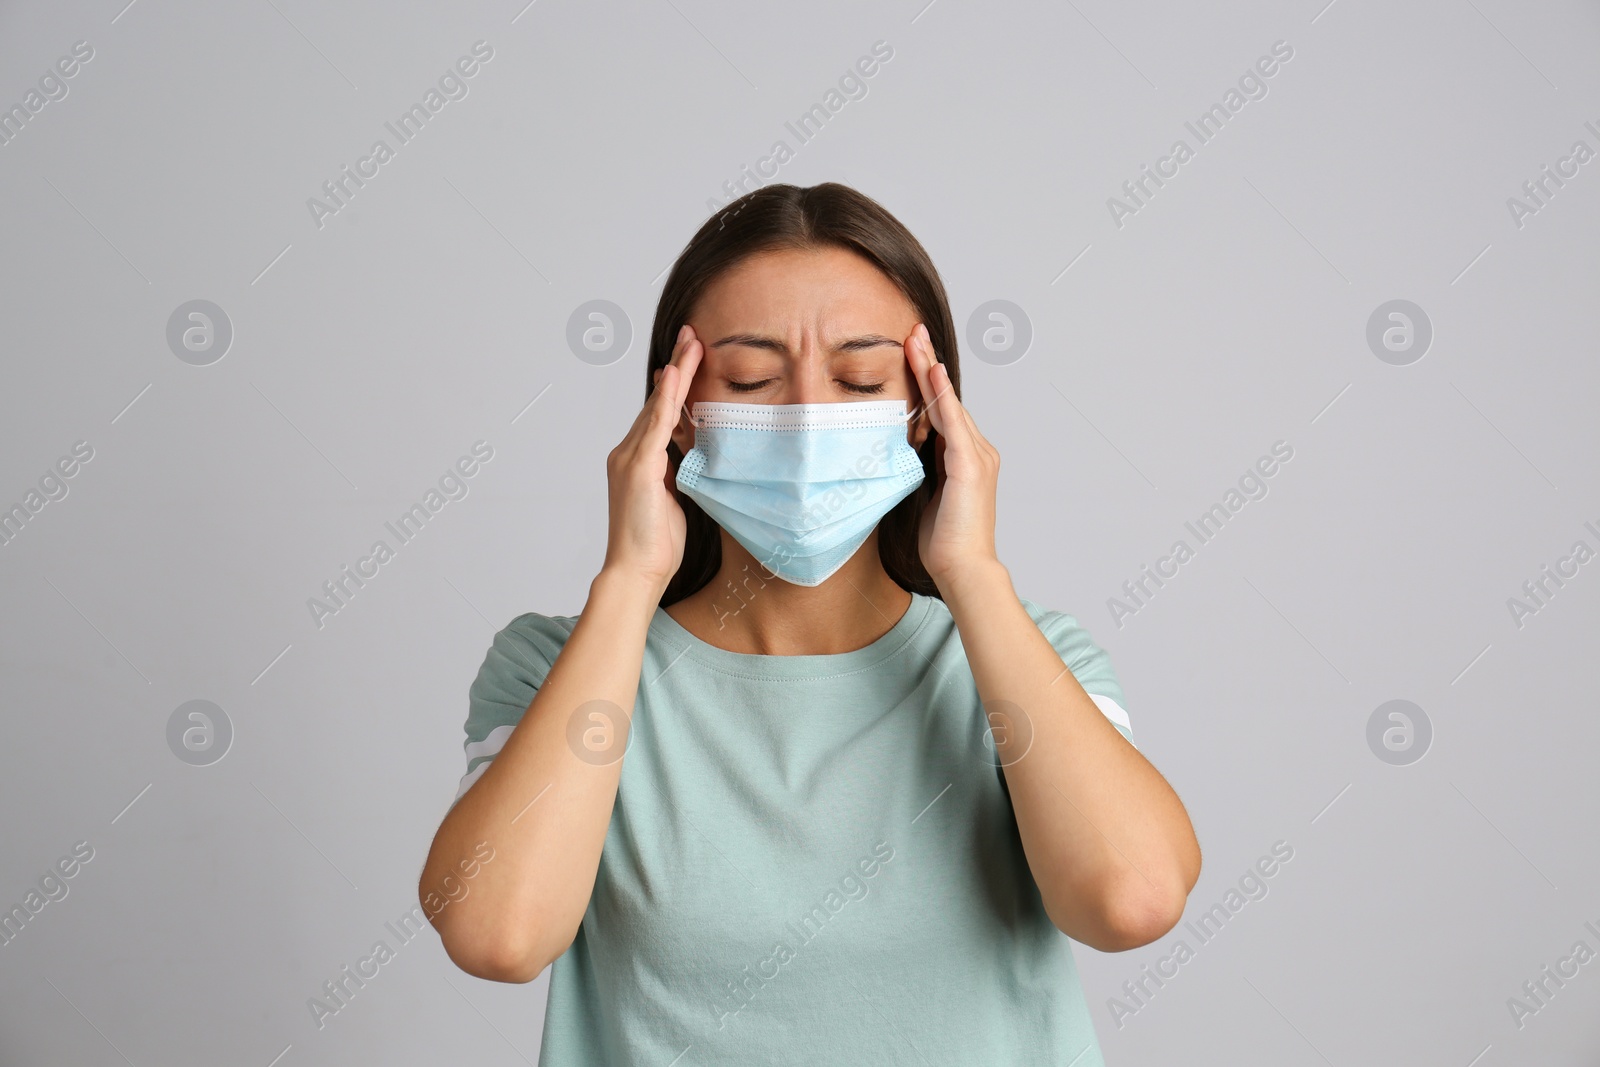 Photo of Stressed woman in protective mask on grey background. Mental health problems during COVID-19 pandemic